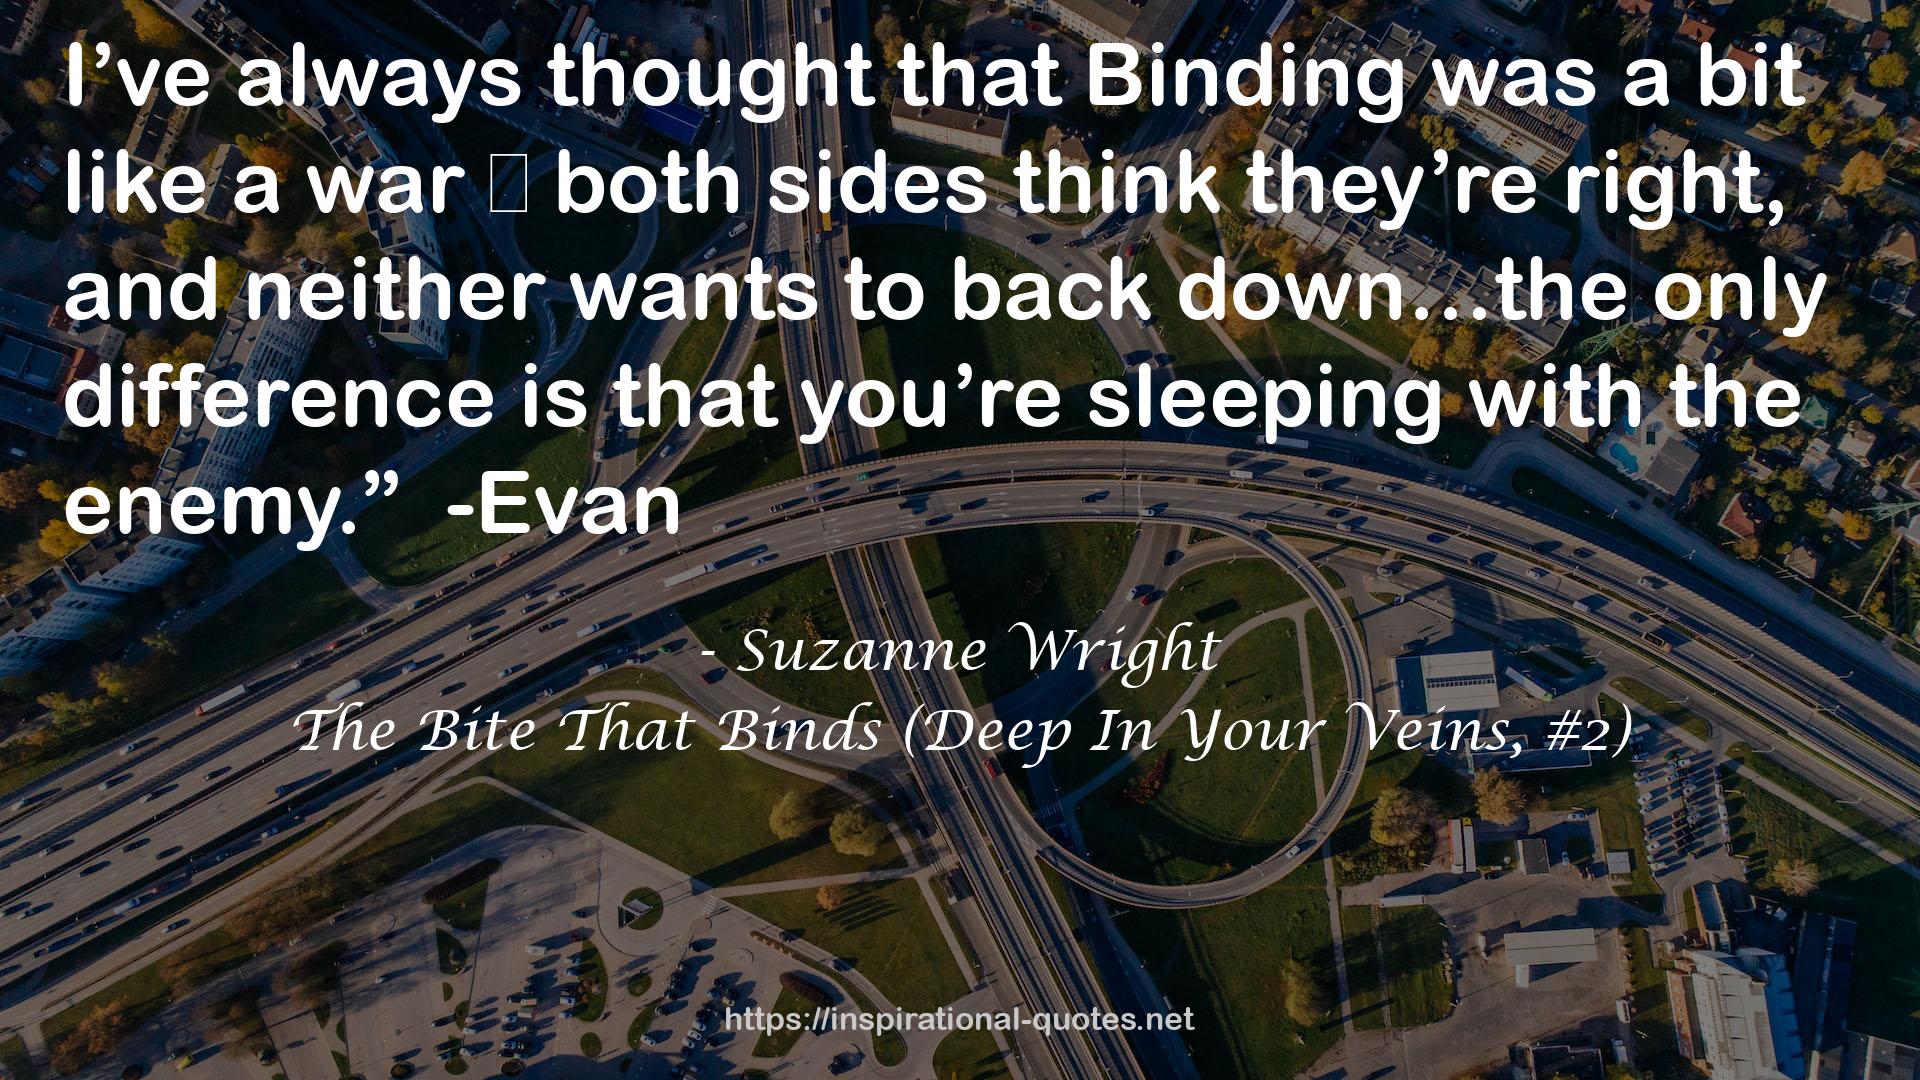 The Bite That Binds (Deep In Your Veins, #2) QUOTES